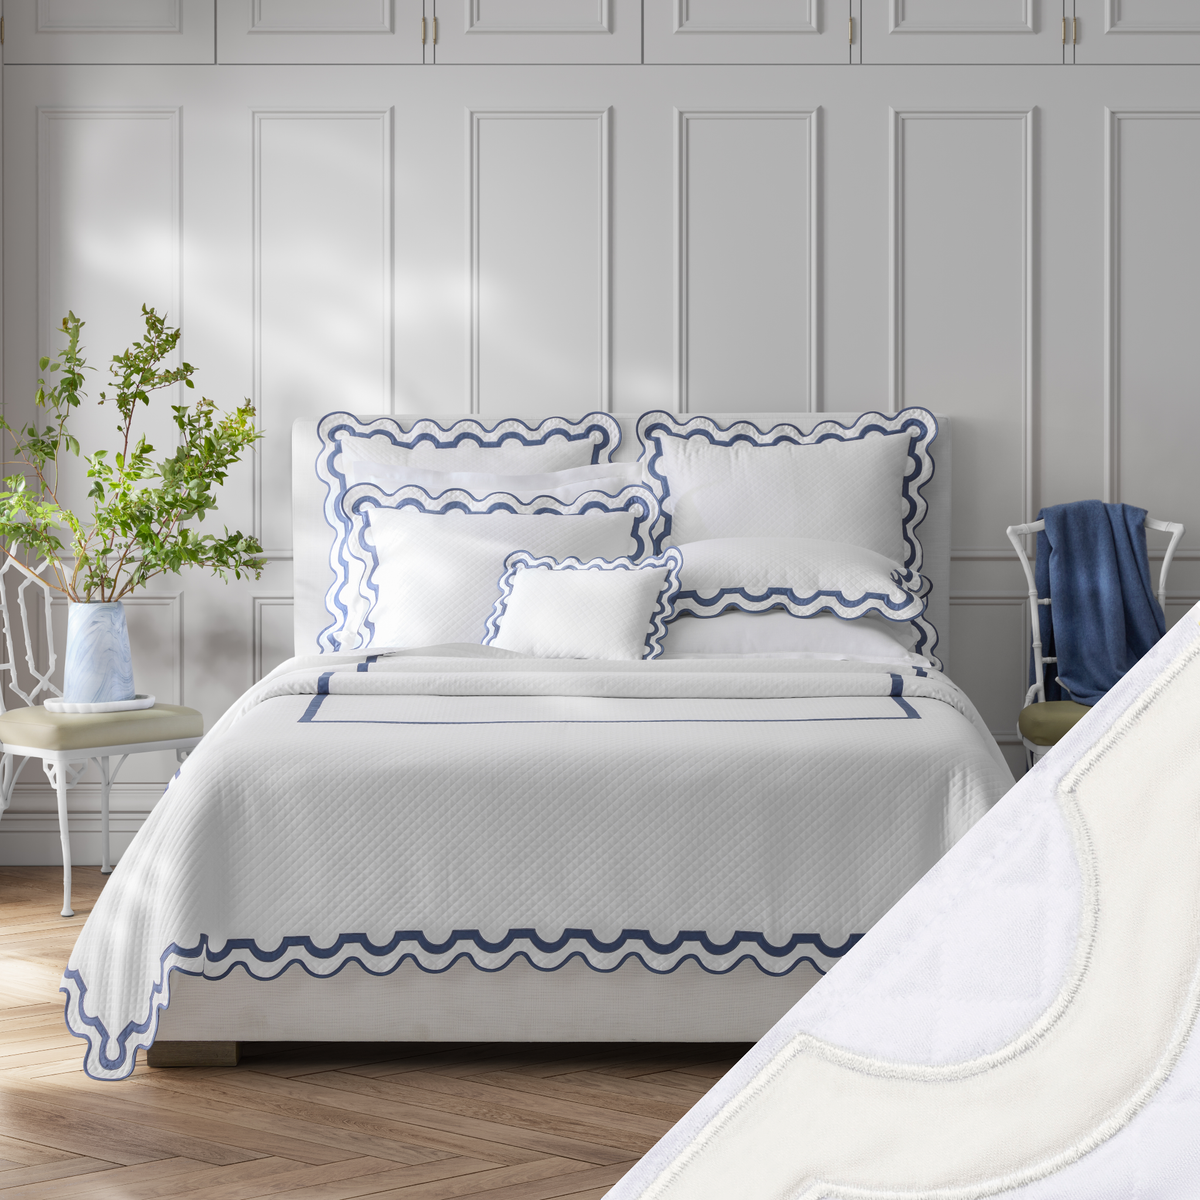 Full Bed Dressed in Matouk Mirasol Matelassé Bedding with Swatch in Bone Color